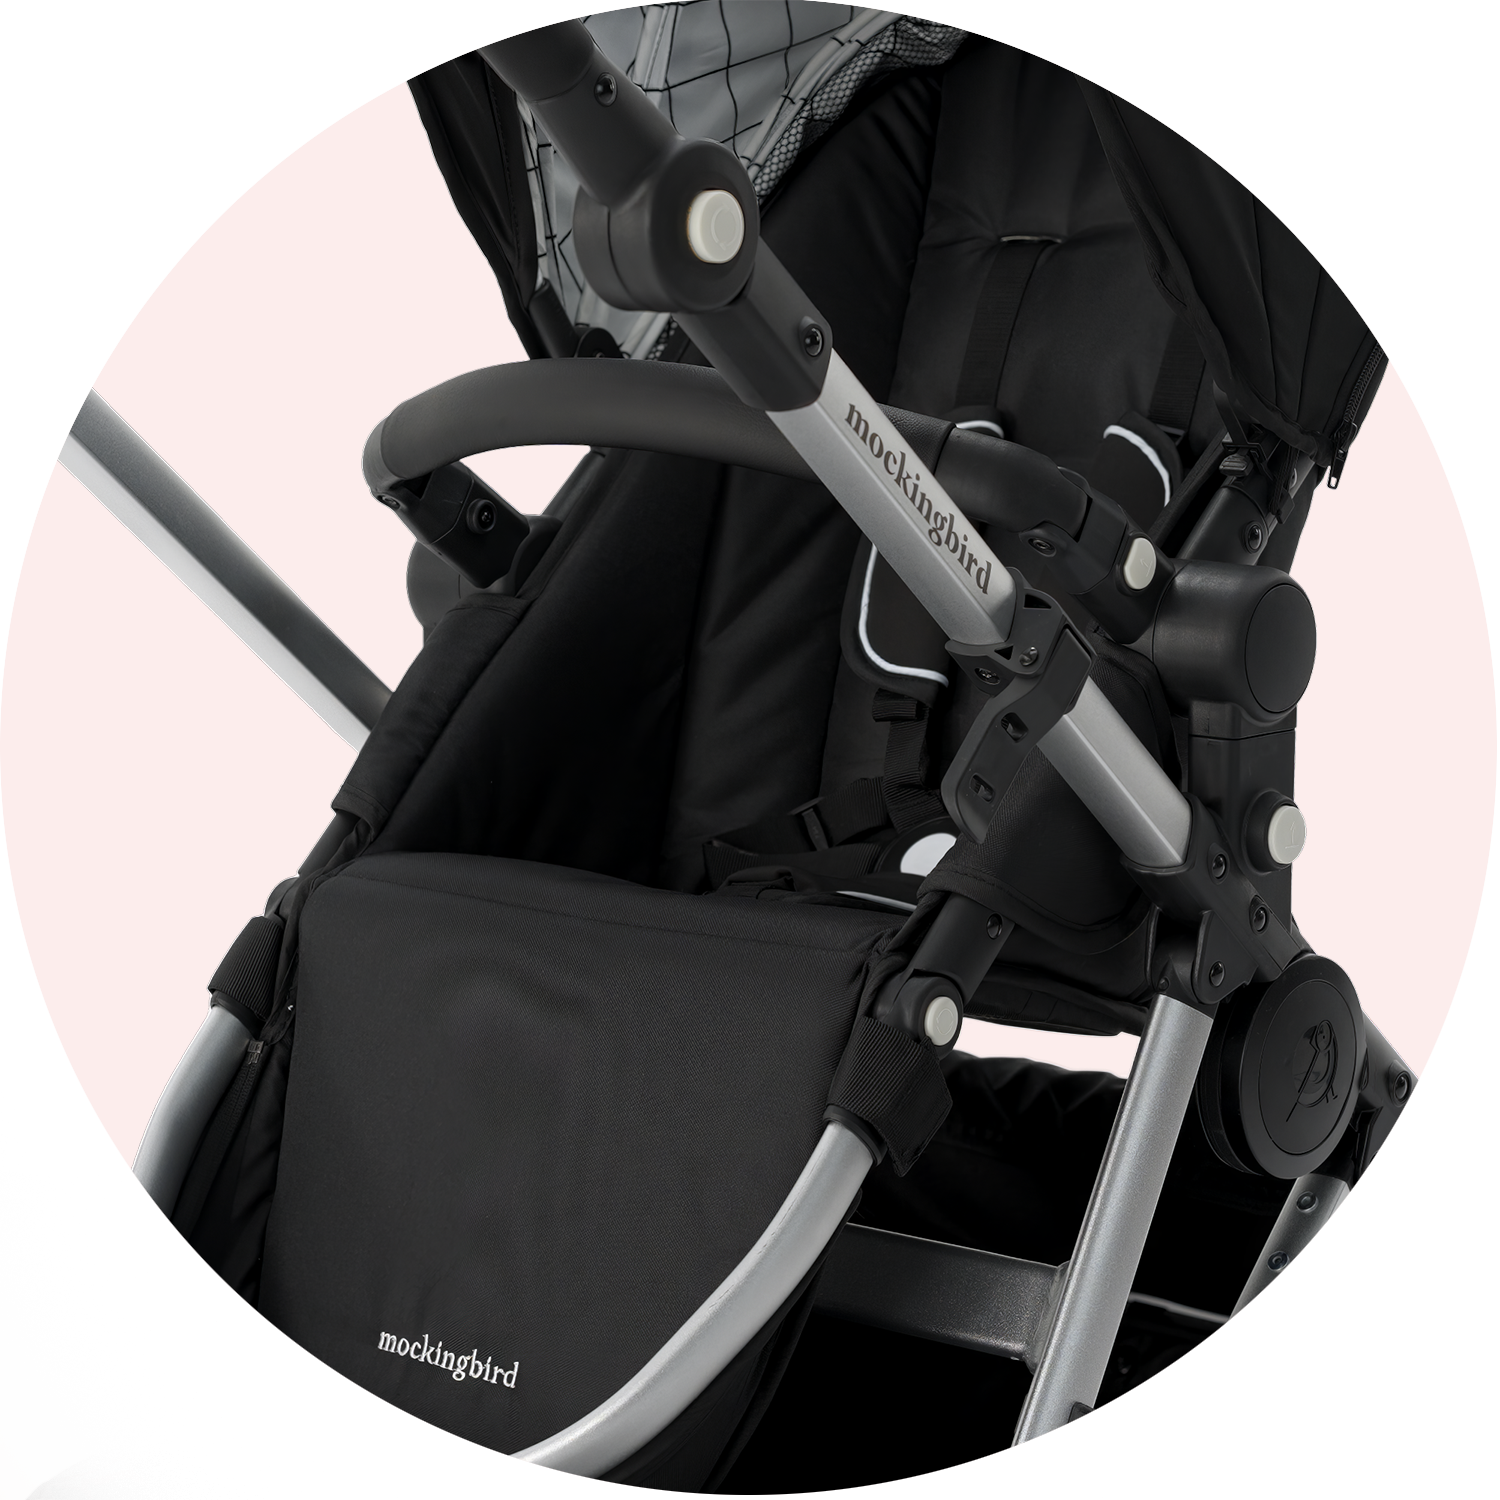 Close-up view of a black mockingbird stroller with visible brand logo, focusing on its handle and canopy attachment points.